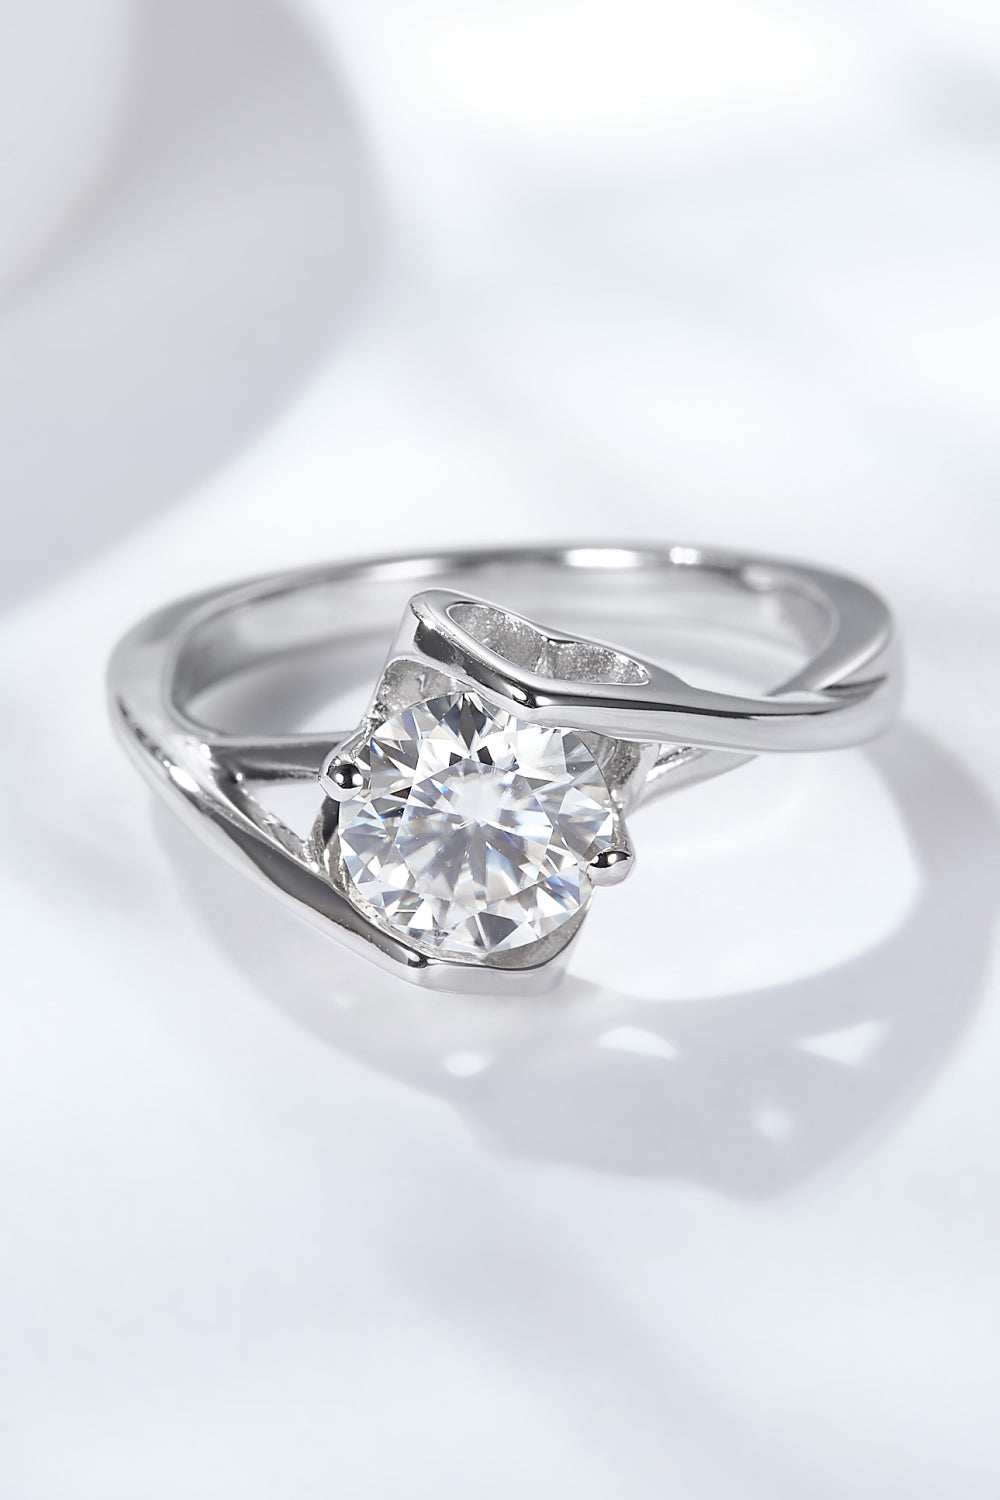 Get What You Need 1 Carat Moissanite Ring-Rings-Inspired by Justeen-Women's Clothing Boutique